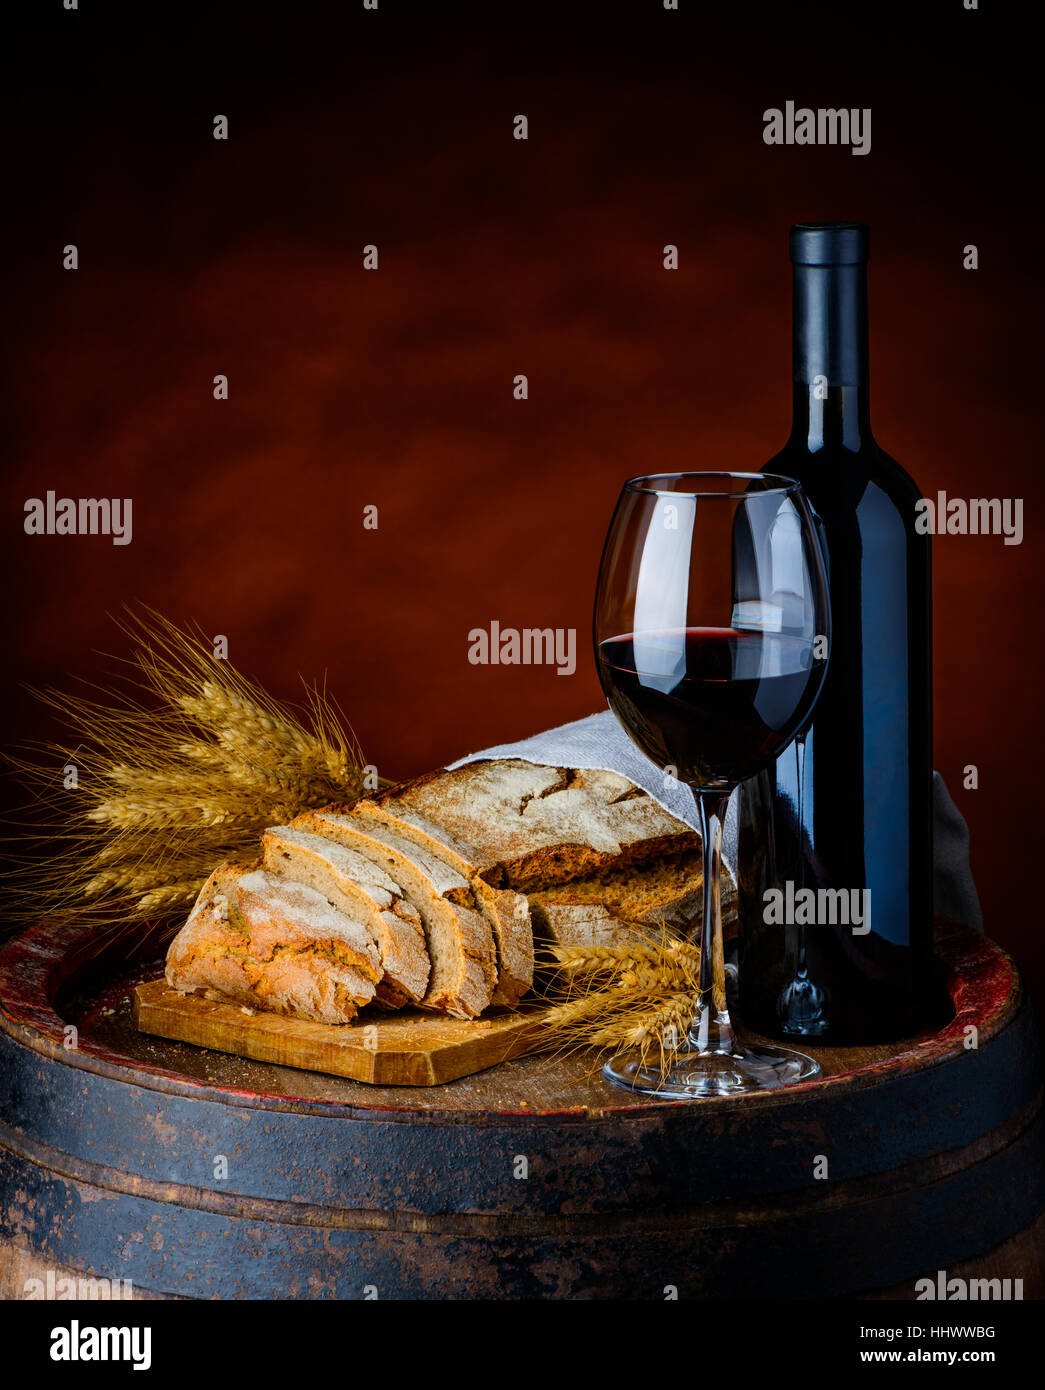 red wine, sliced bread and whteat in a rustic setup Stock Photo